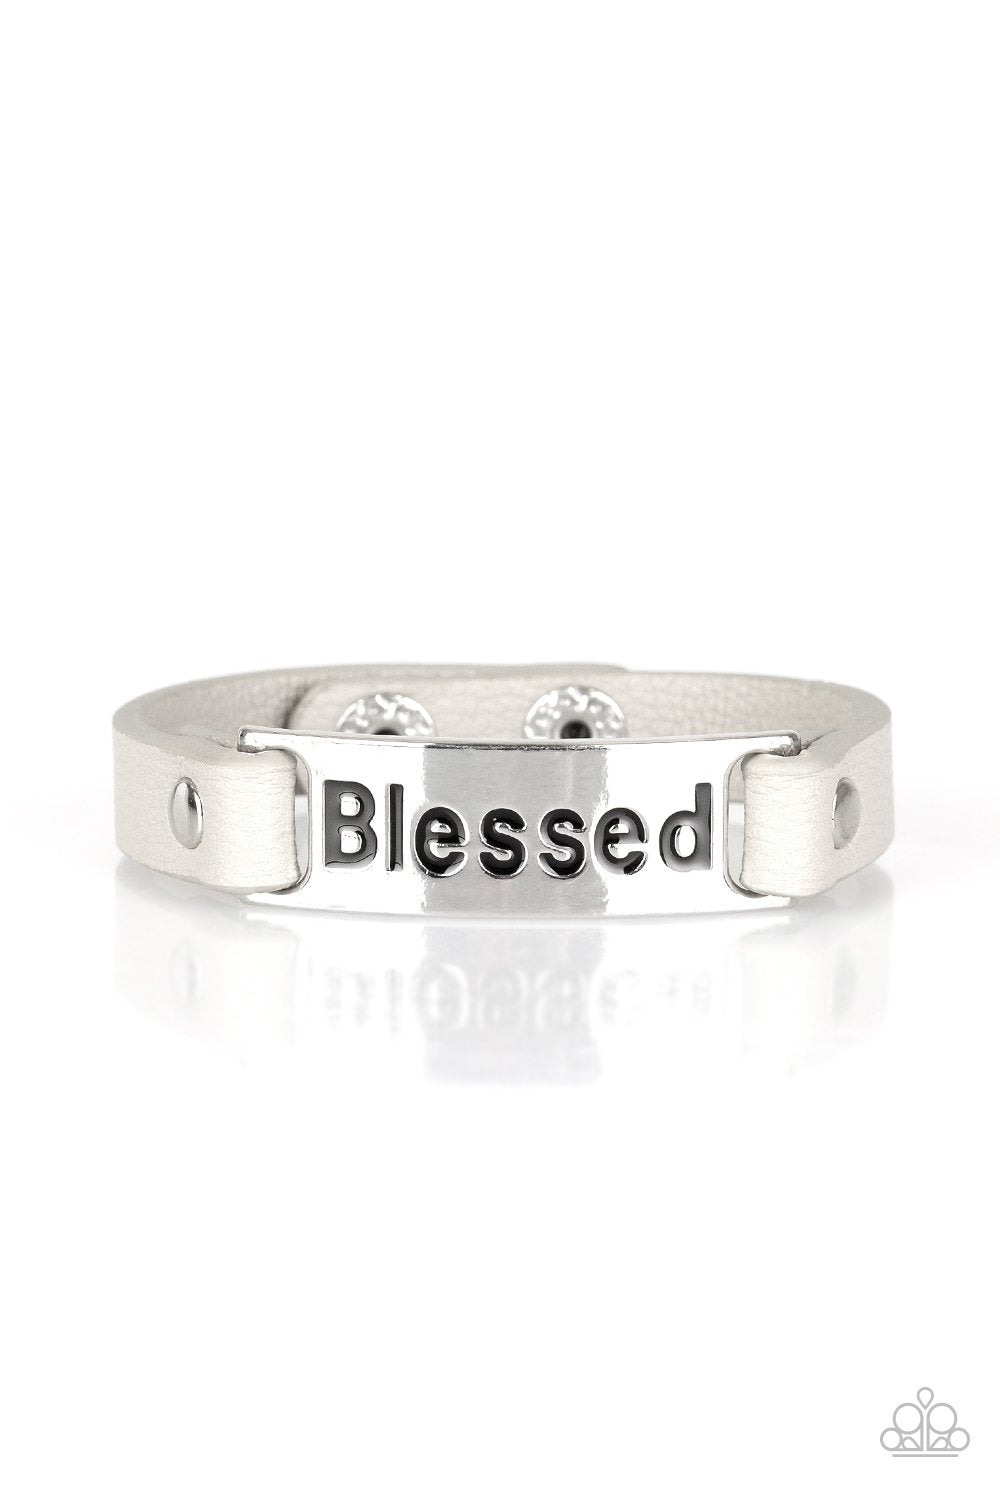 Count Your Blessings Silver Wrap Snap Bracelet - Paparazzi Accessories-CarasShop.com - $5 Jewelry by Cara Jewels